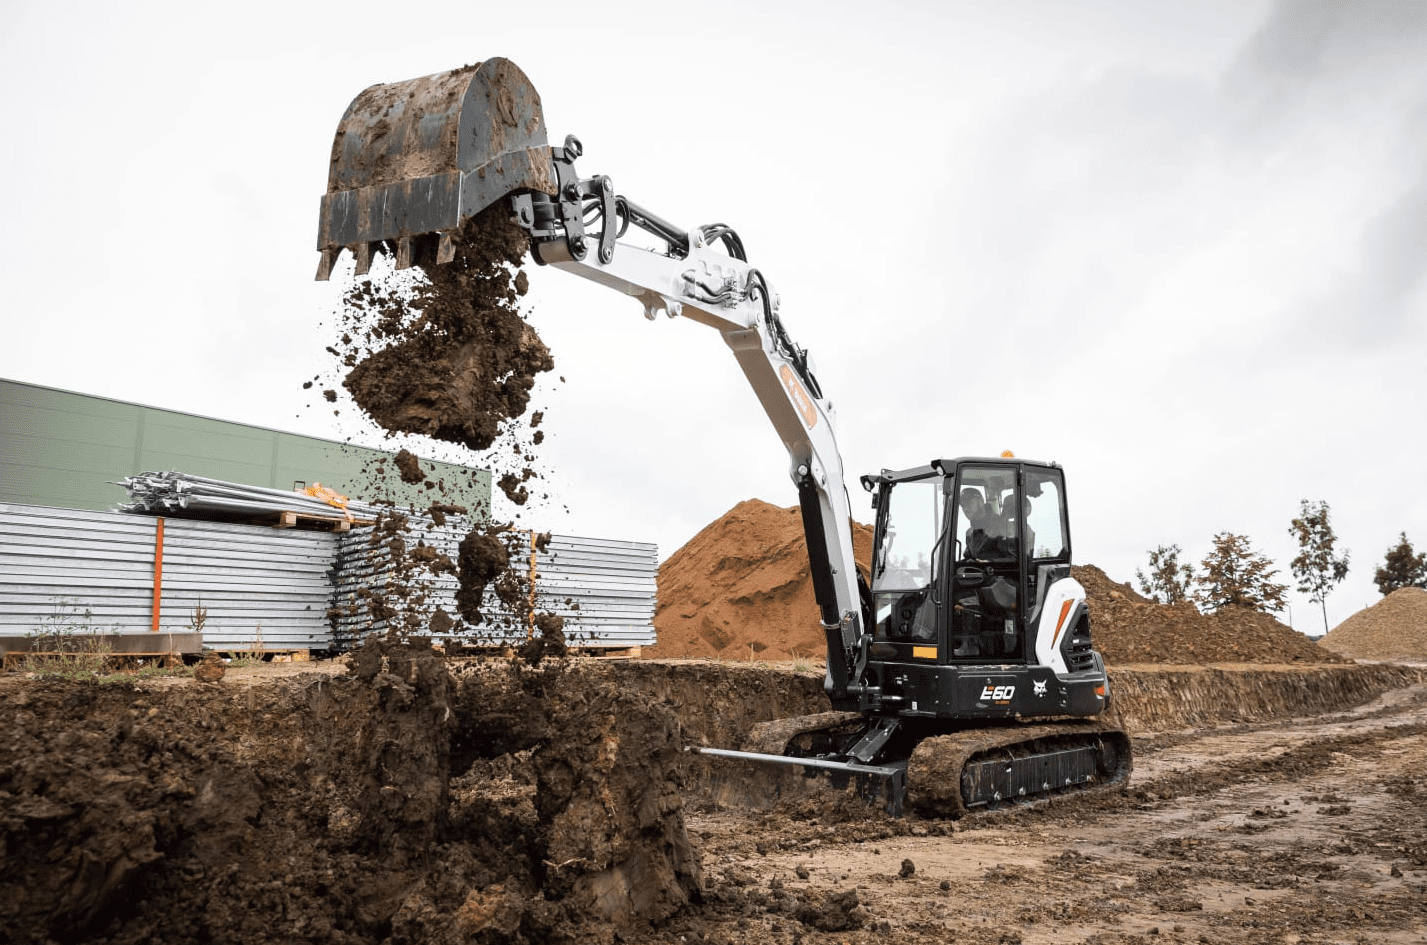 Browse Specs and more for the E60 Compact Excavator - White Star Machinery